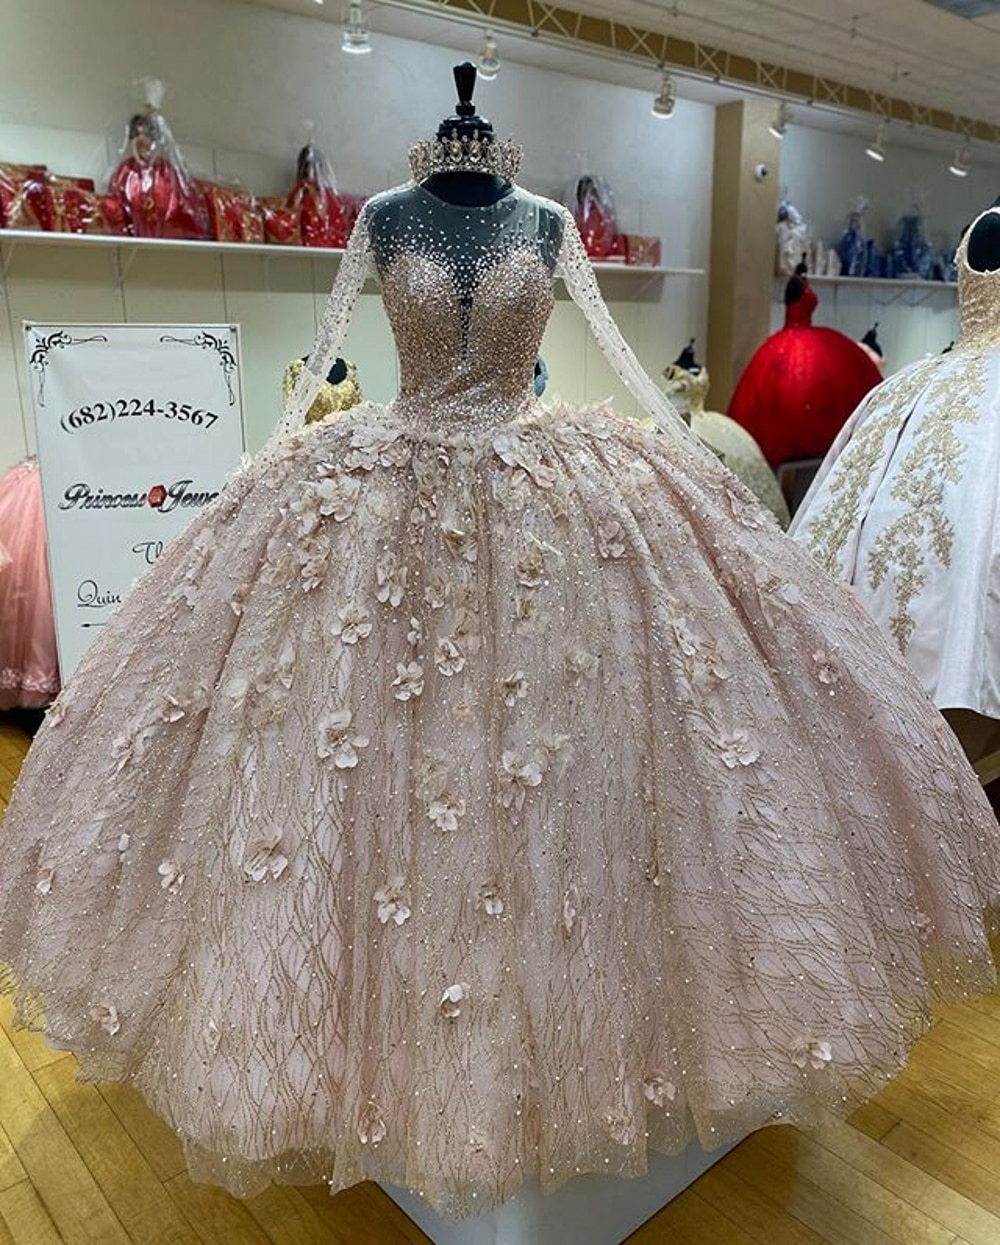 long sleeves illusion quinceanera dress,quinceanera dress with long sleeves,where can i find sparkly quinceanera dress,sheer neckline quinceanera dress,2021 quinceanera dress,quinceanera dress with 3d flowers,deep v neckline quinceanera dress,champagne colored quinceanera dress,pretty quinceanera dress long sleeve,